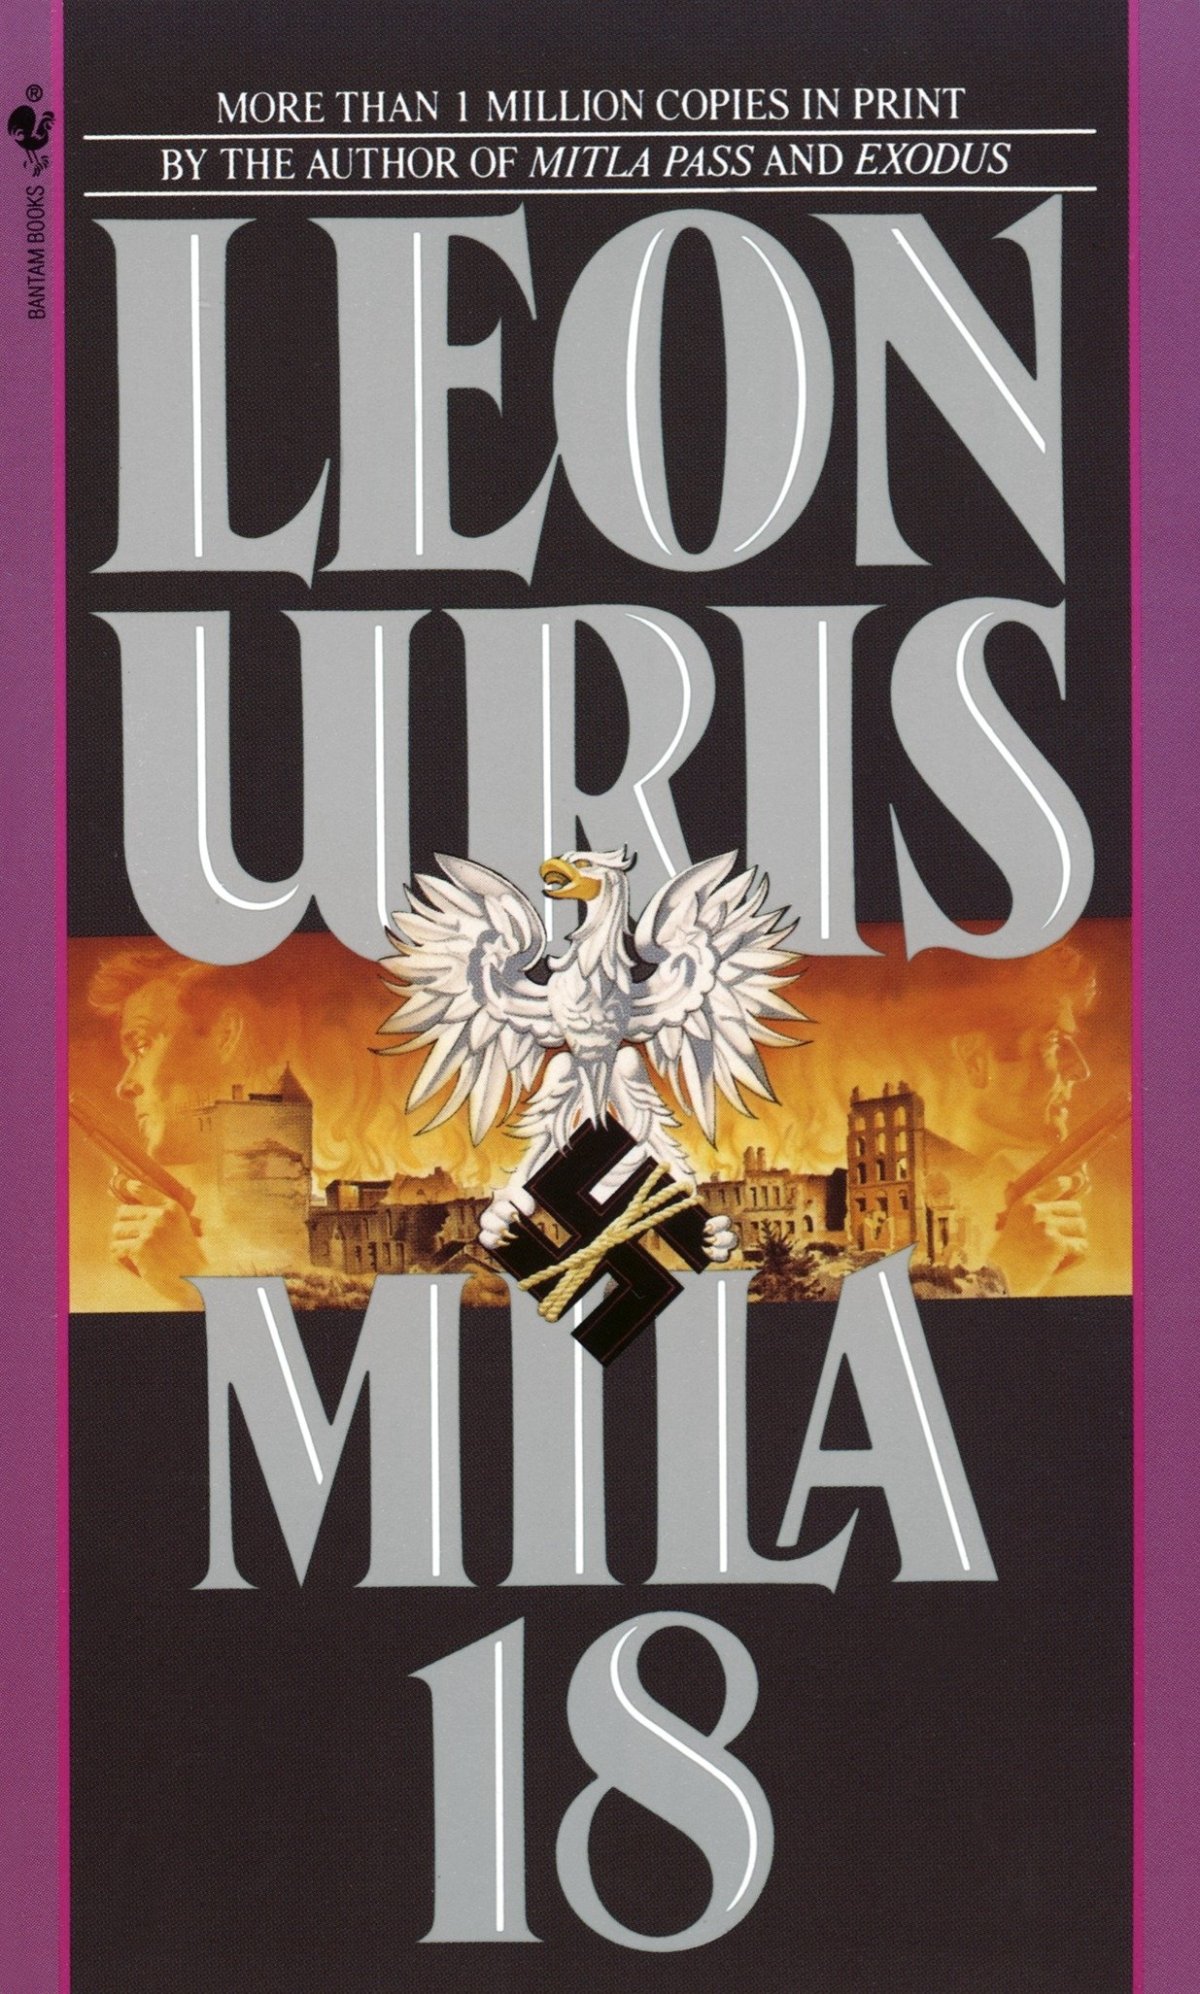 Mila 18 by Leon Uris 📚 BOOK REVIEW